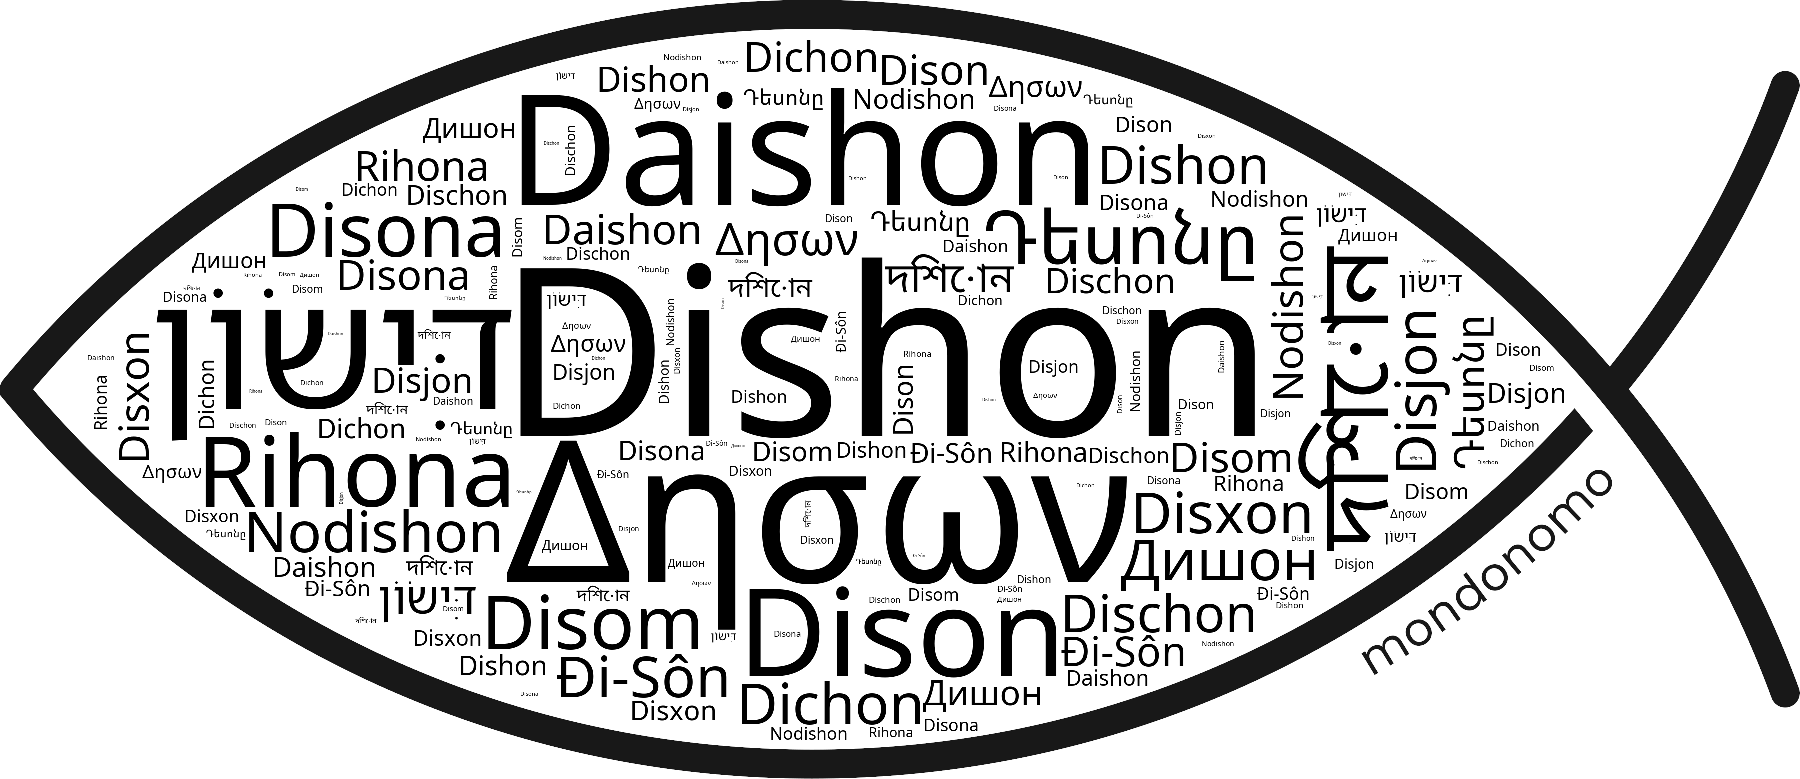 Name Dishon in the world's Bibles